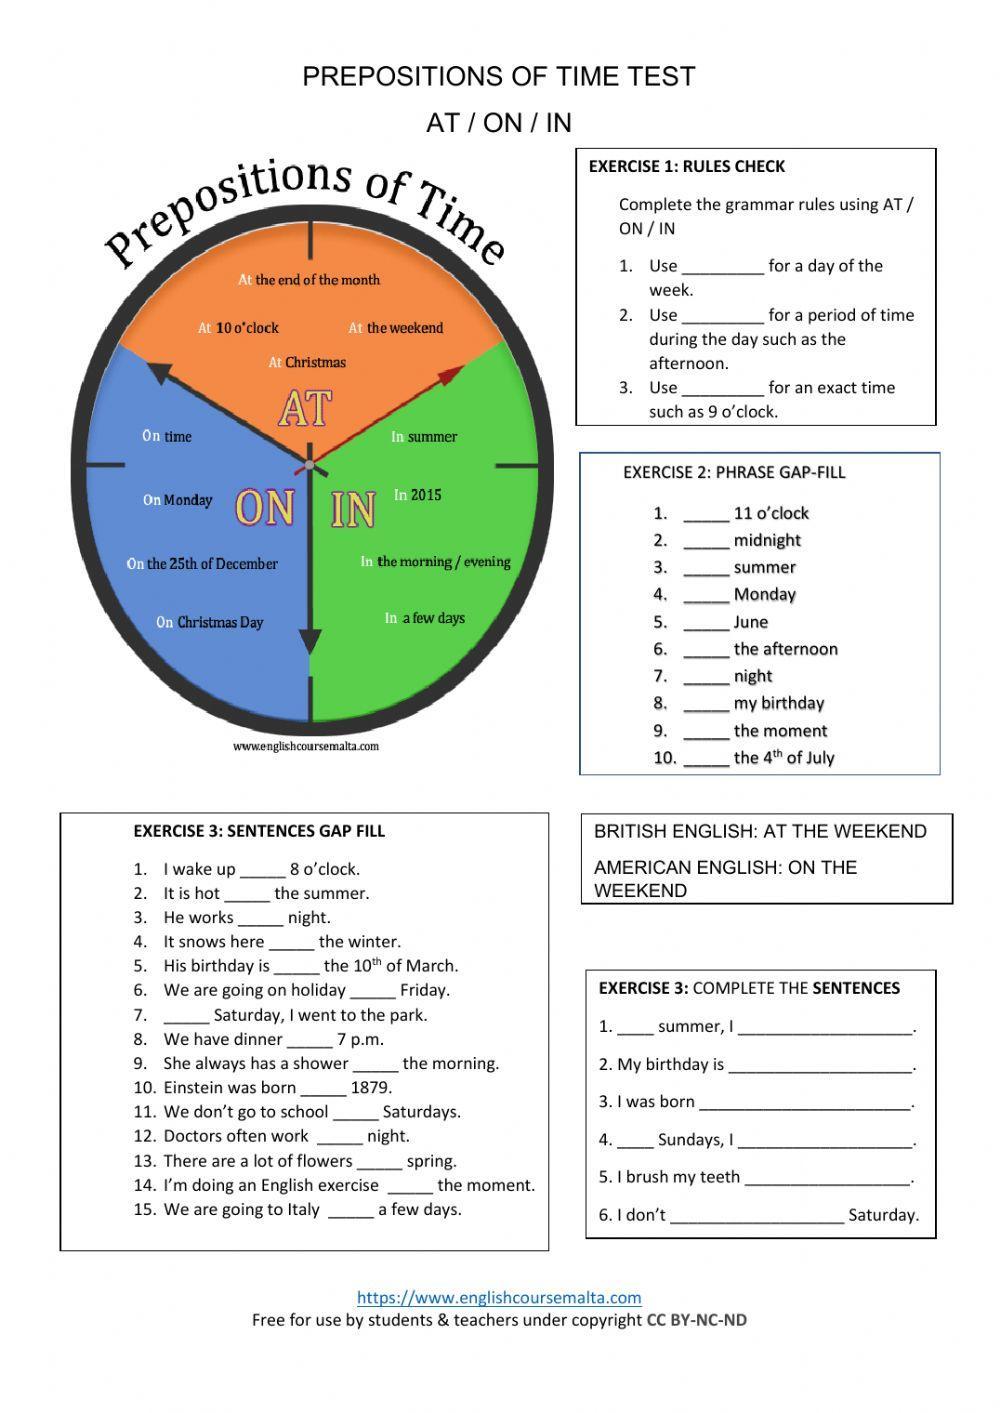 Prepositions of Time AT - ON - IN